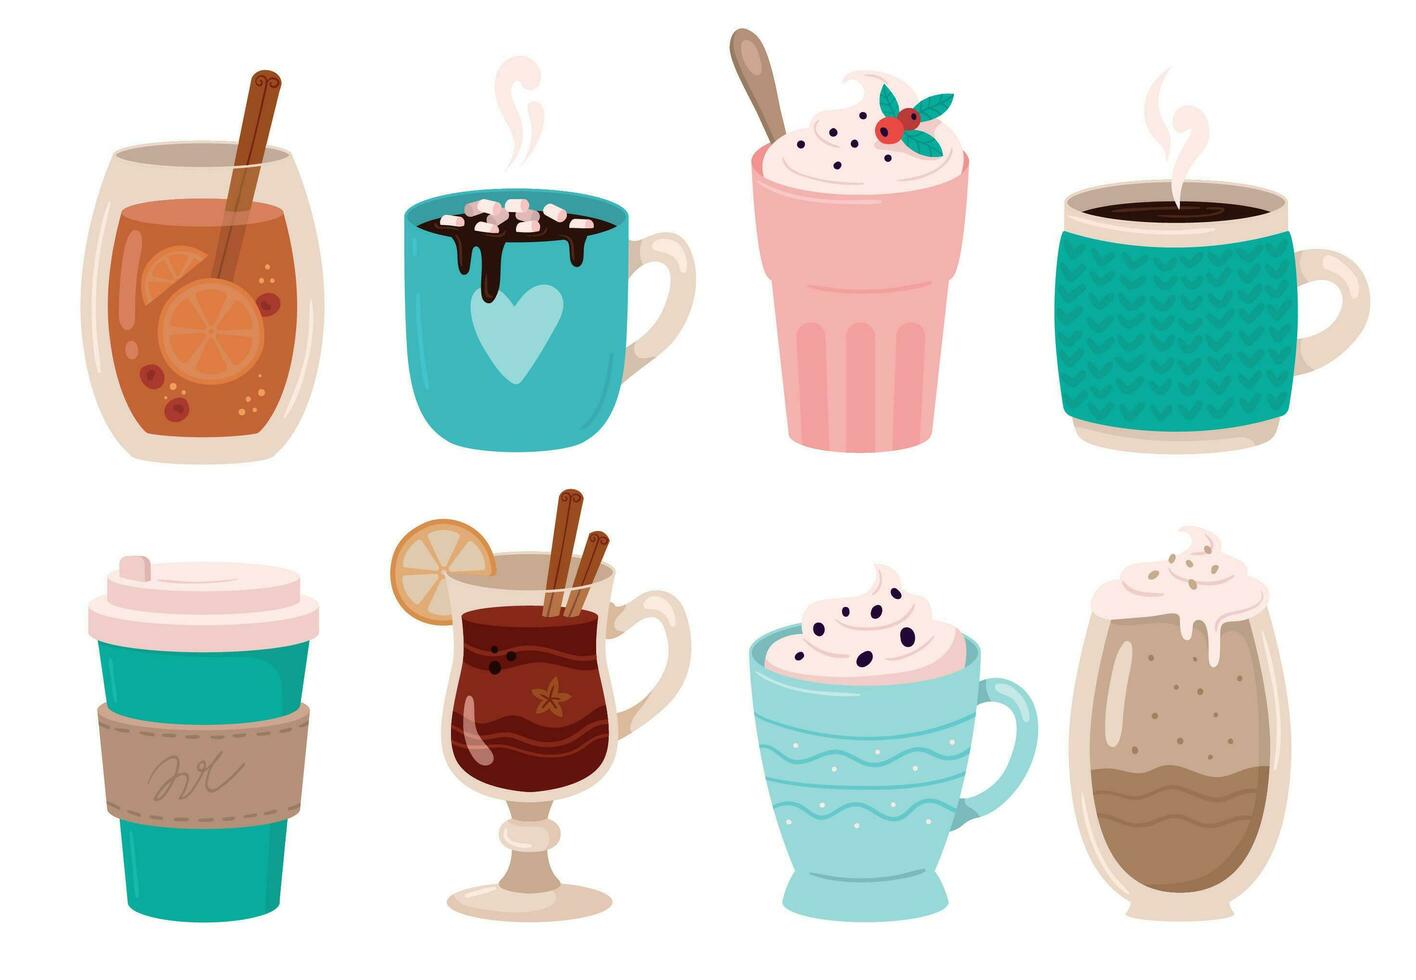 Warming winter drinks. Hot chocolate, cocoa with marshmallows and whipped cream. Mulled wine in winters mug vector illustration set